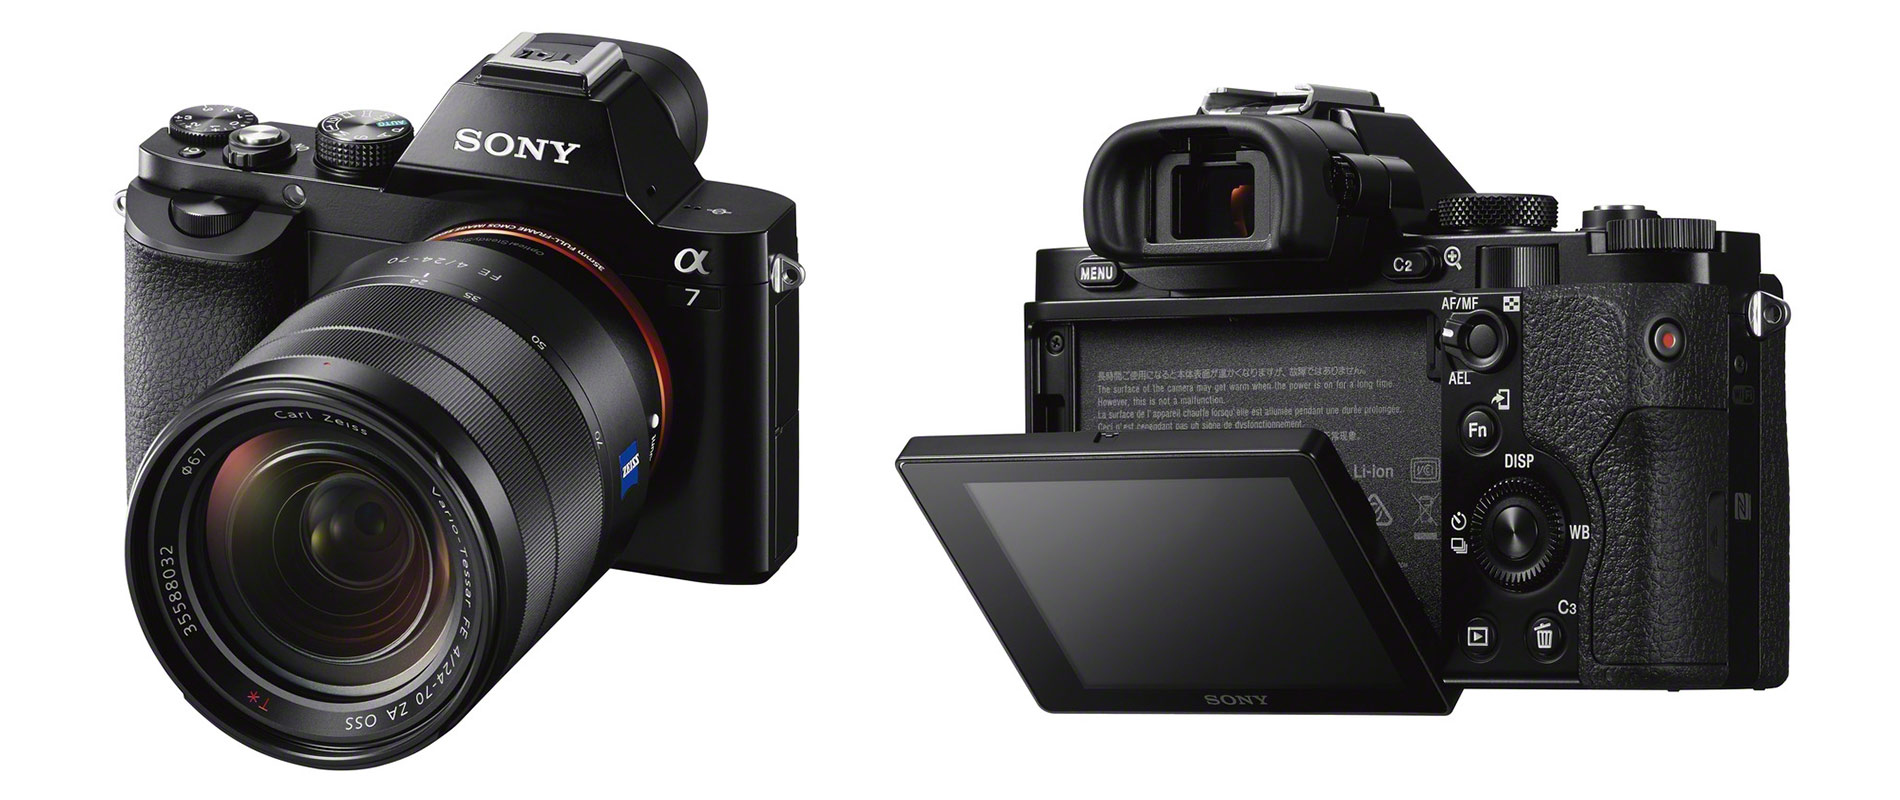 Sony Alpha A7 front and back image